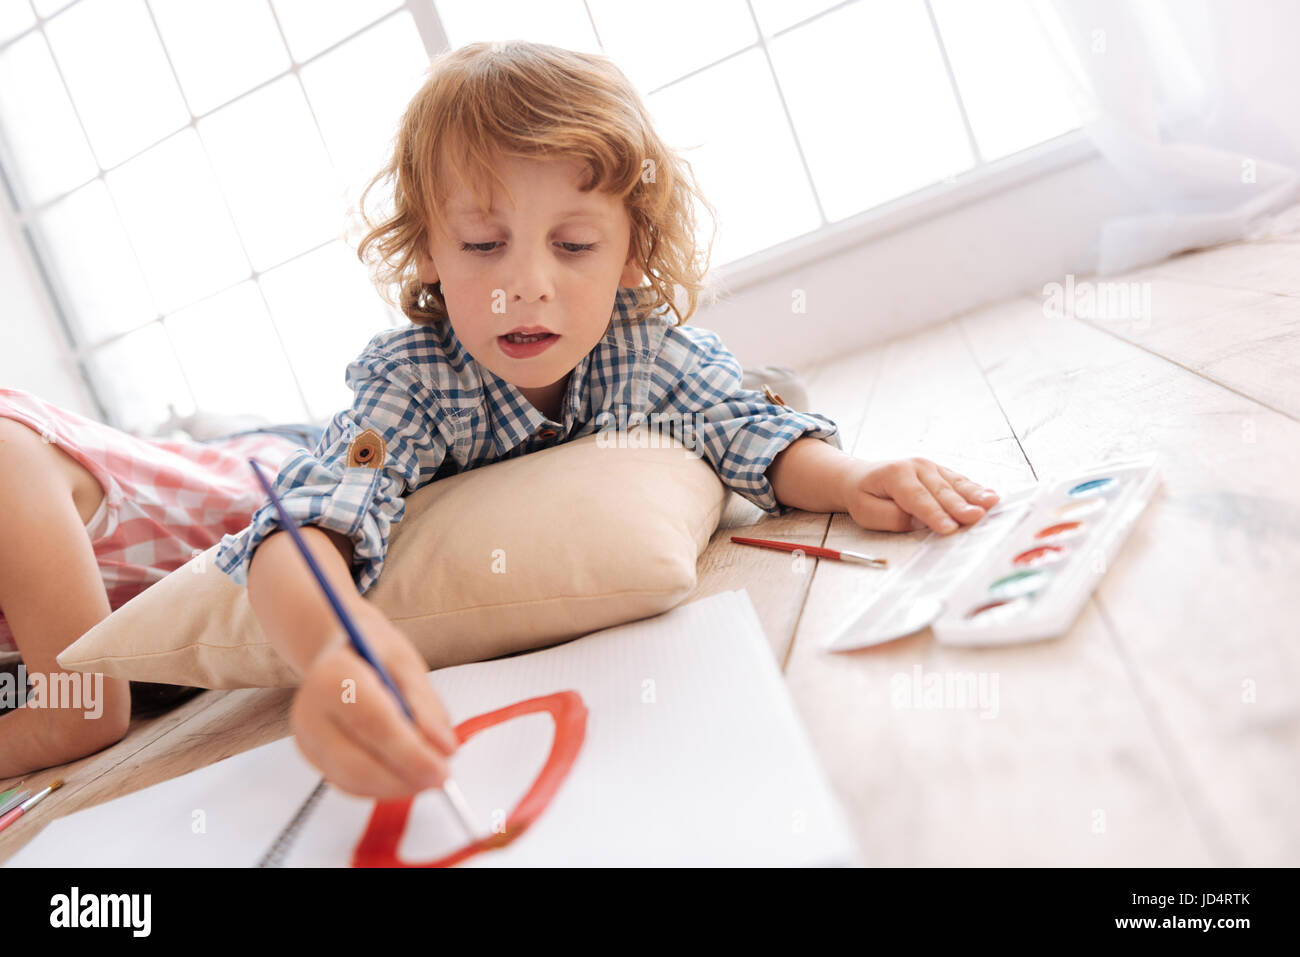 Cute skillful boy painting a picture Stock Photo